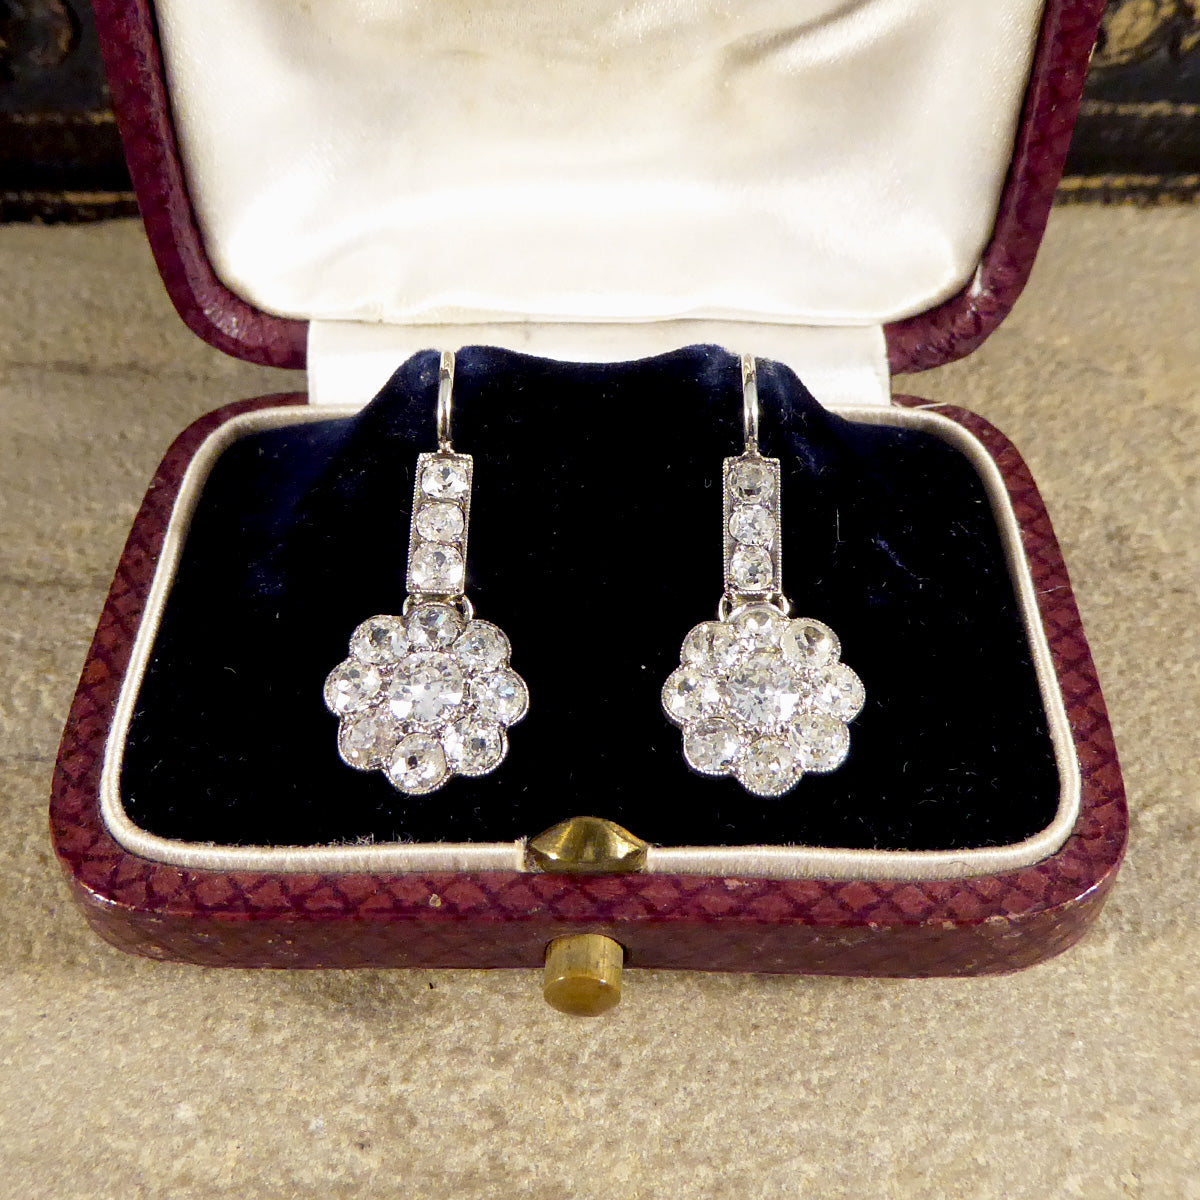 Antique Edwardian 2.62ct Diamond Daisy Cluster Drop Earrings in 18ct White Gold